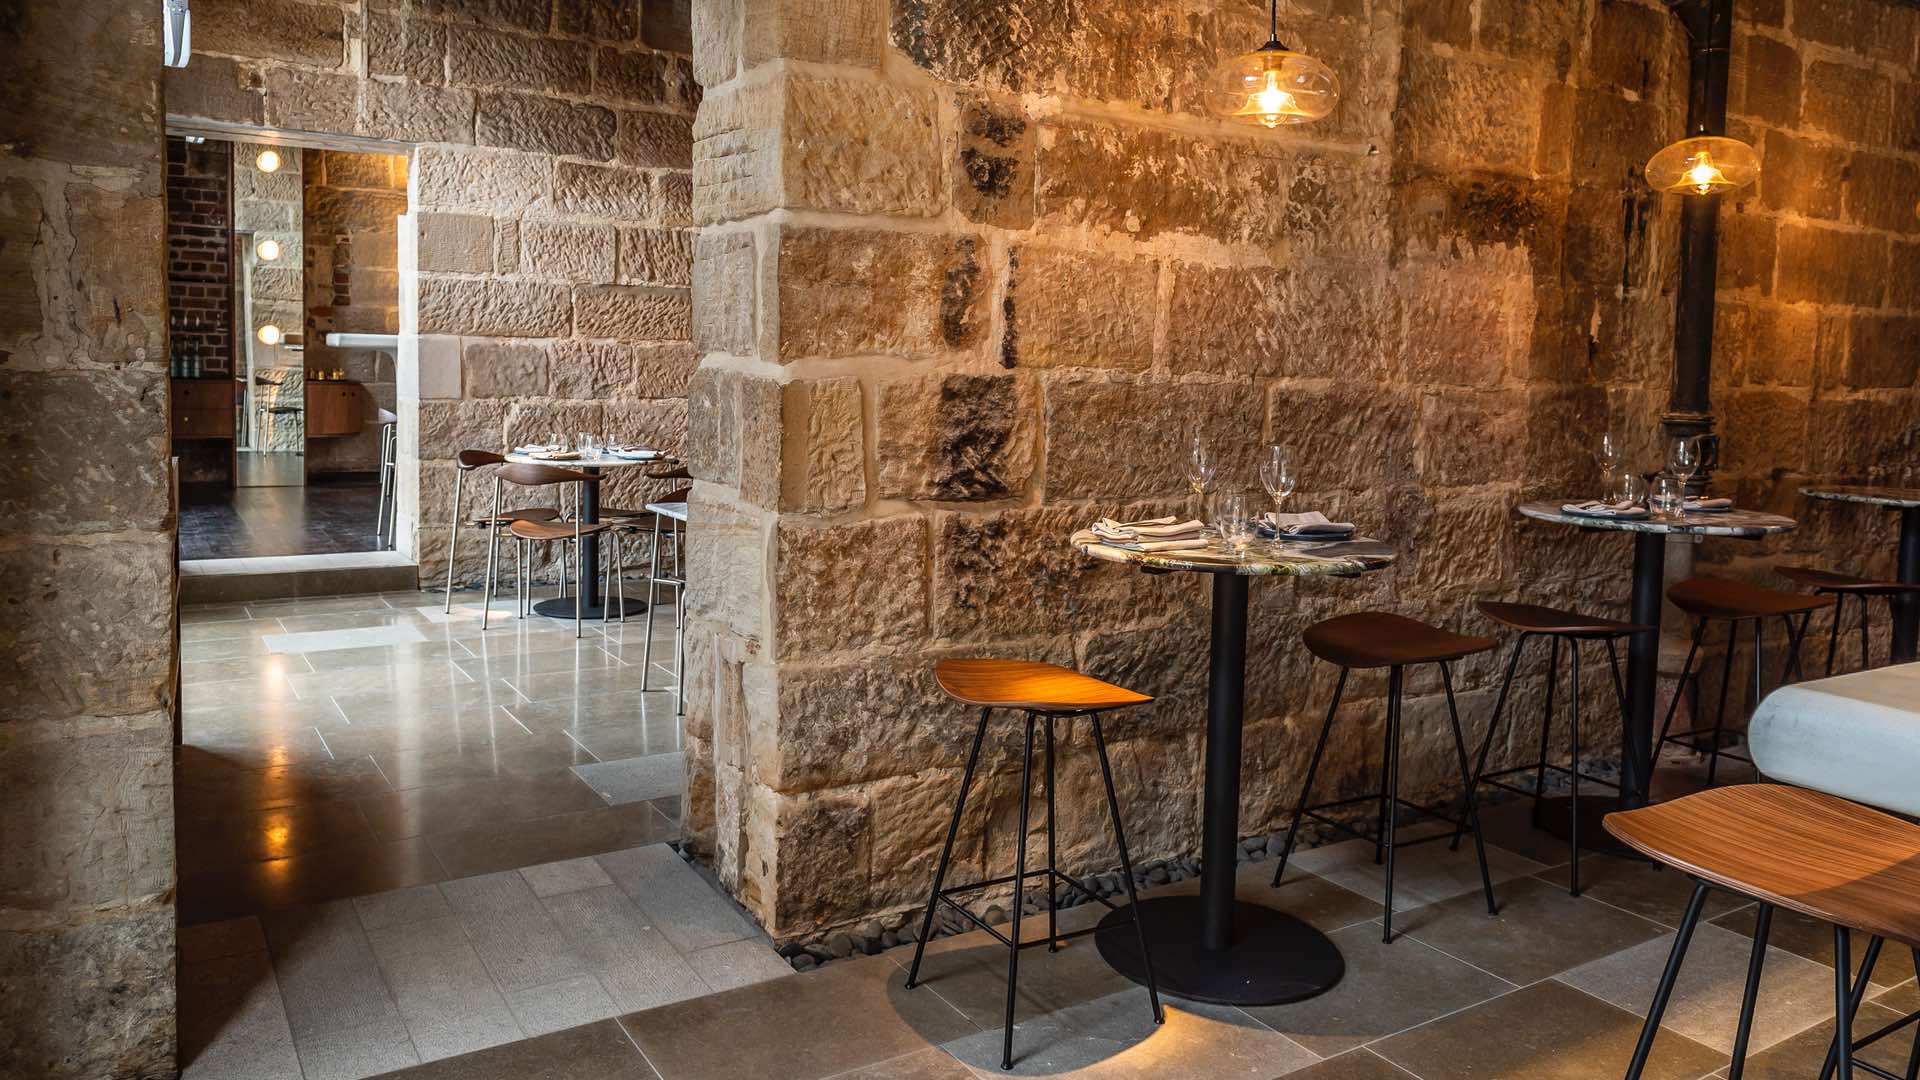 Tayim Is Sydney's New Middle Eastern Restaurant Tucked Away in a Sandstone Building in The Rocks